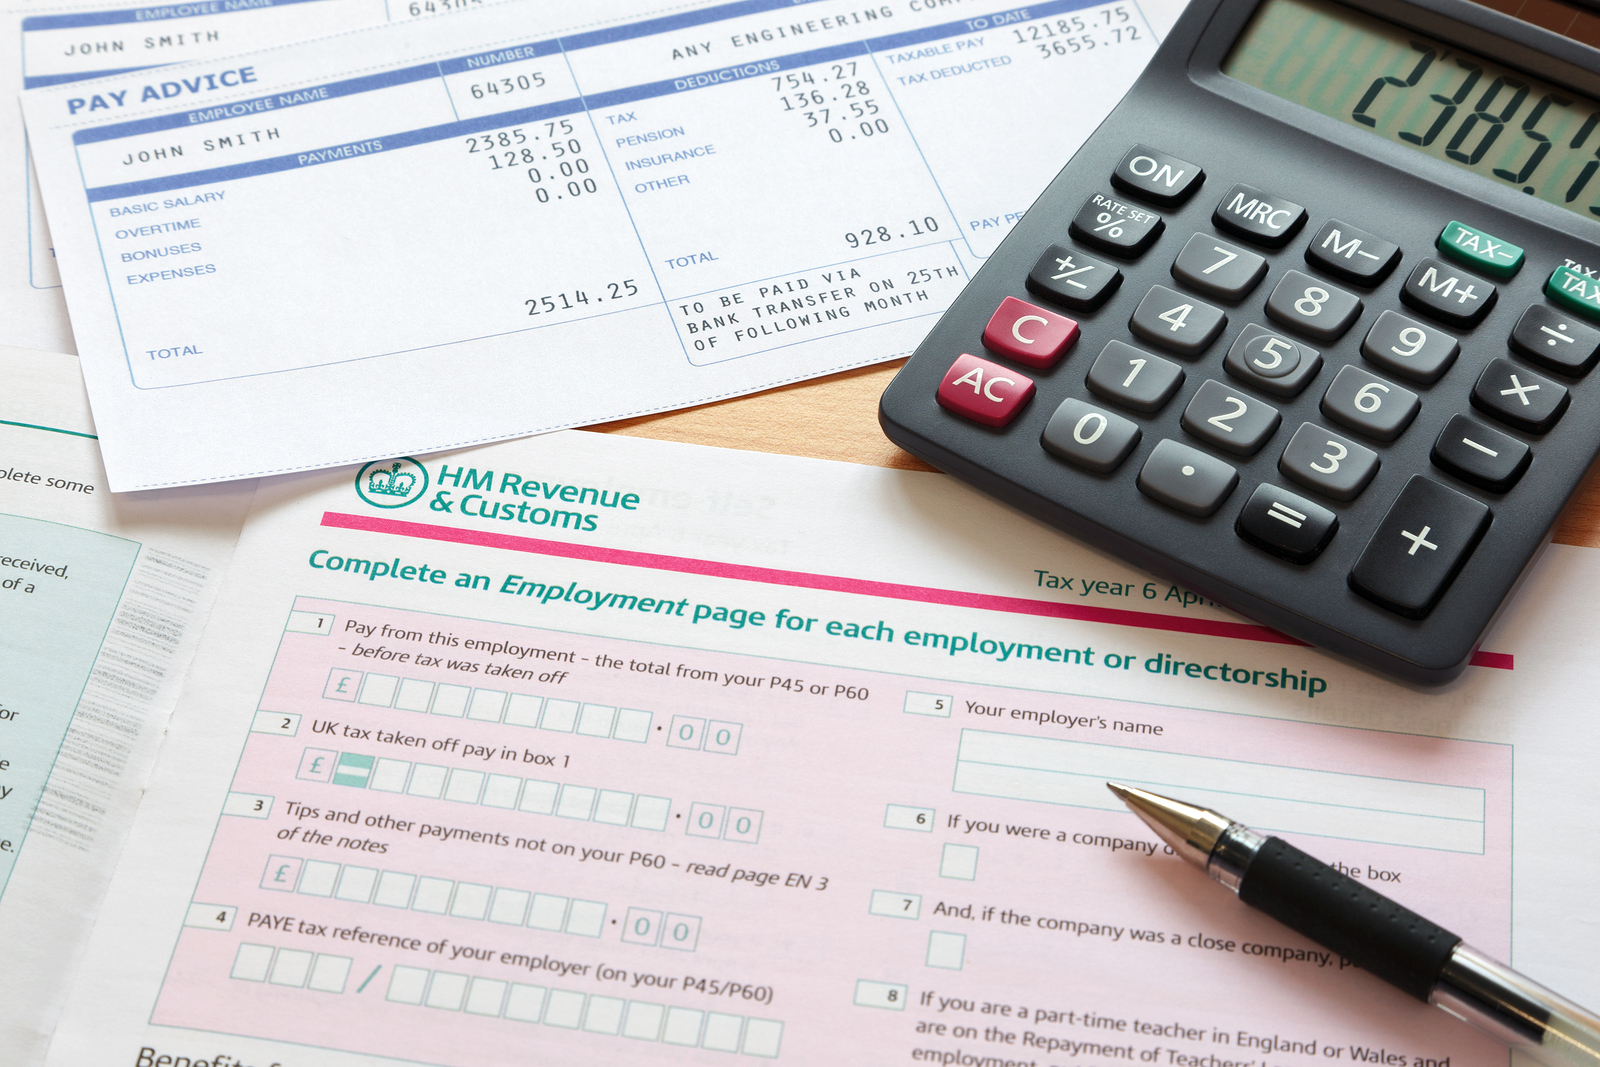 How To File Your Self Assessment Tax Return On Time The Cheap Accountants